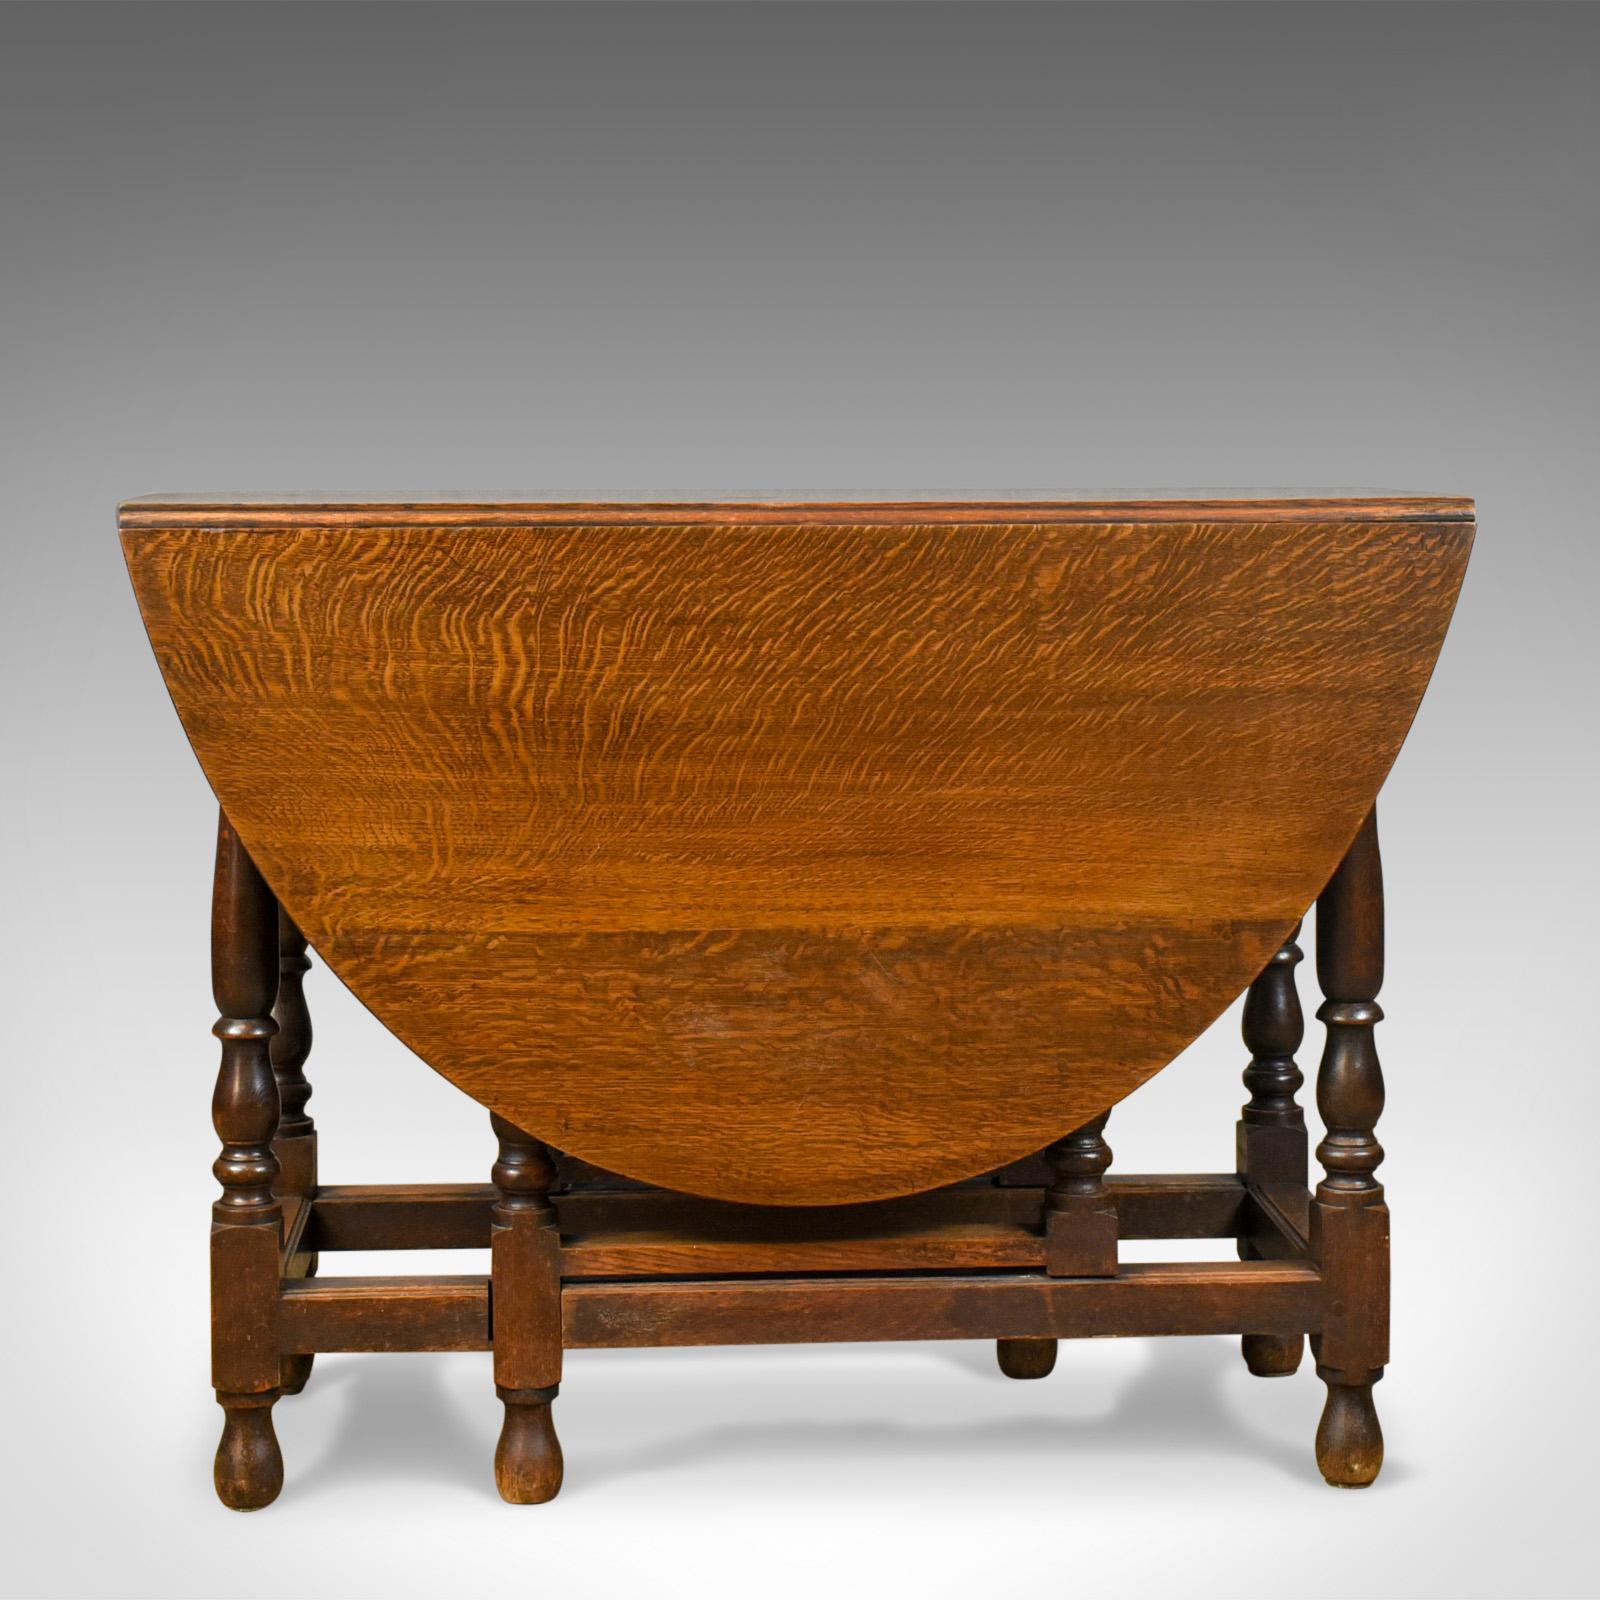 This is an antique gate leg table, an Edwardian, English, oak, country kitchen dining table in the 17th century taste, dating to circa 1910.

Crafted from generously thick English oak
Grain interest displaying wisps of medullary rays
Good color